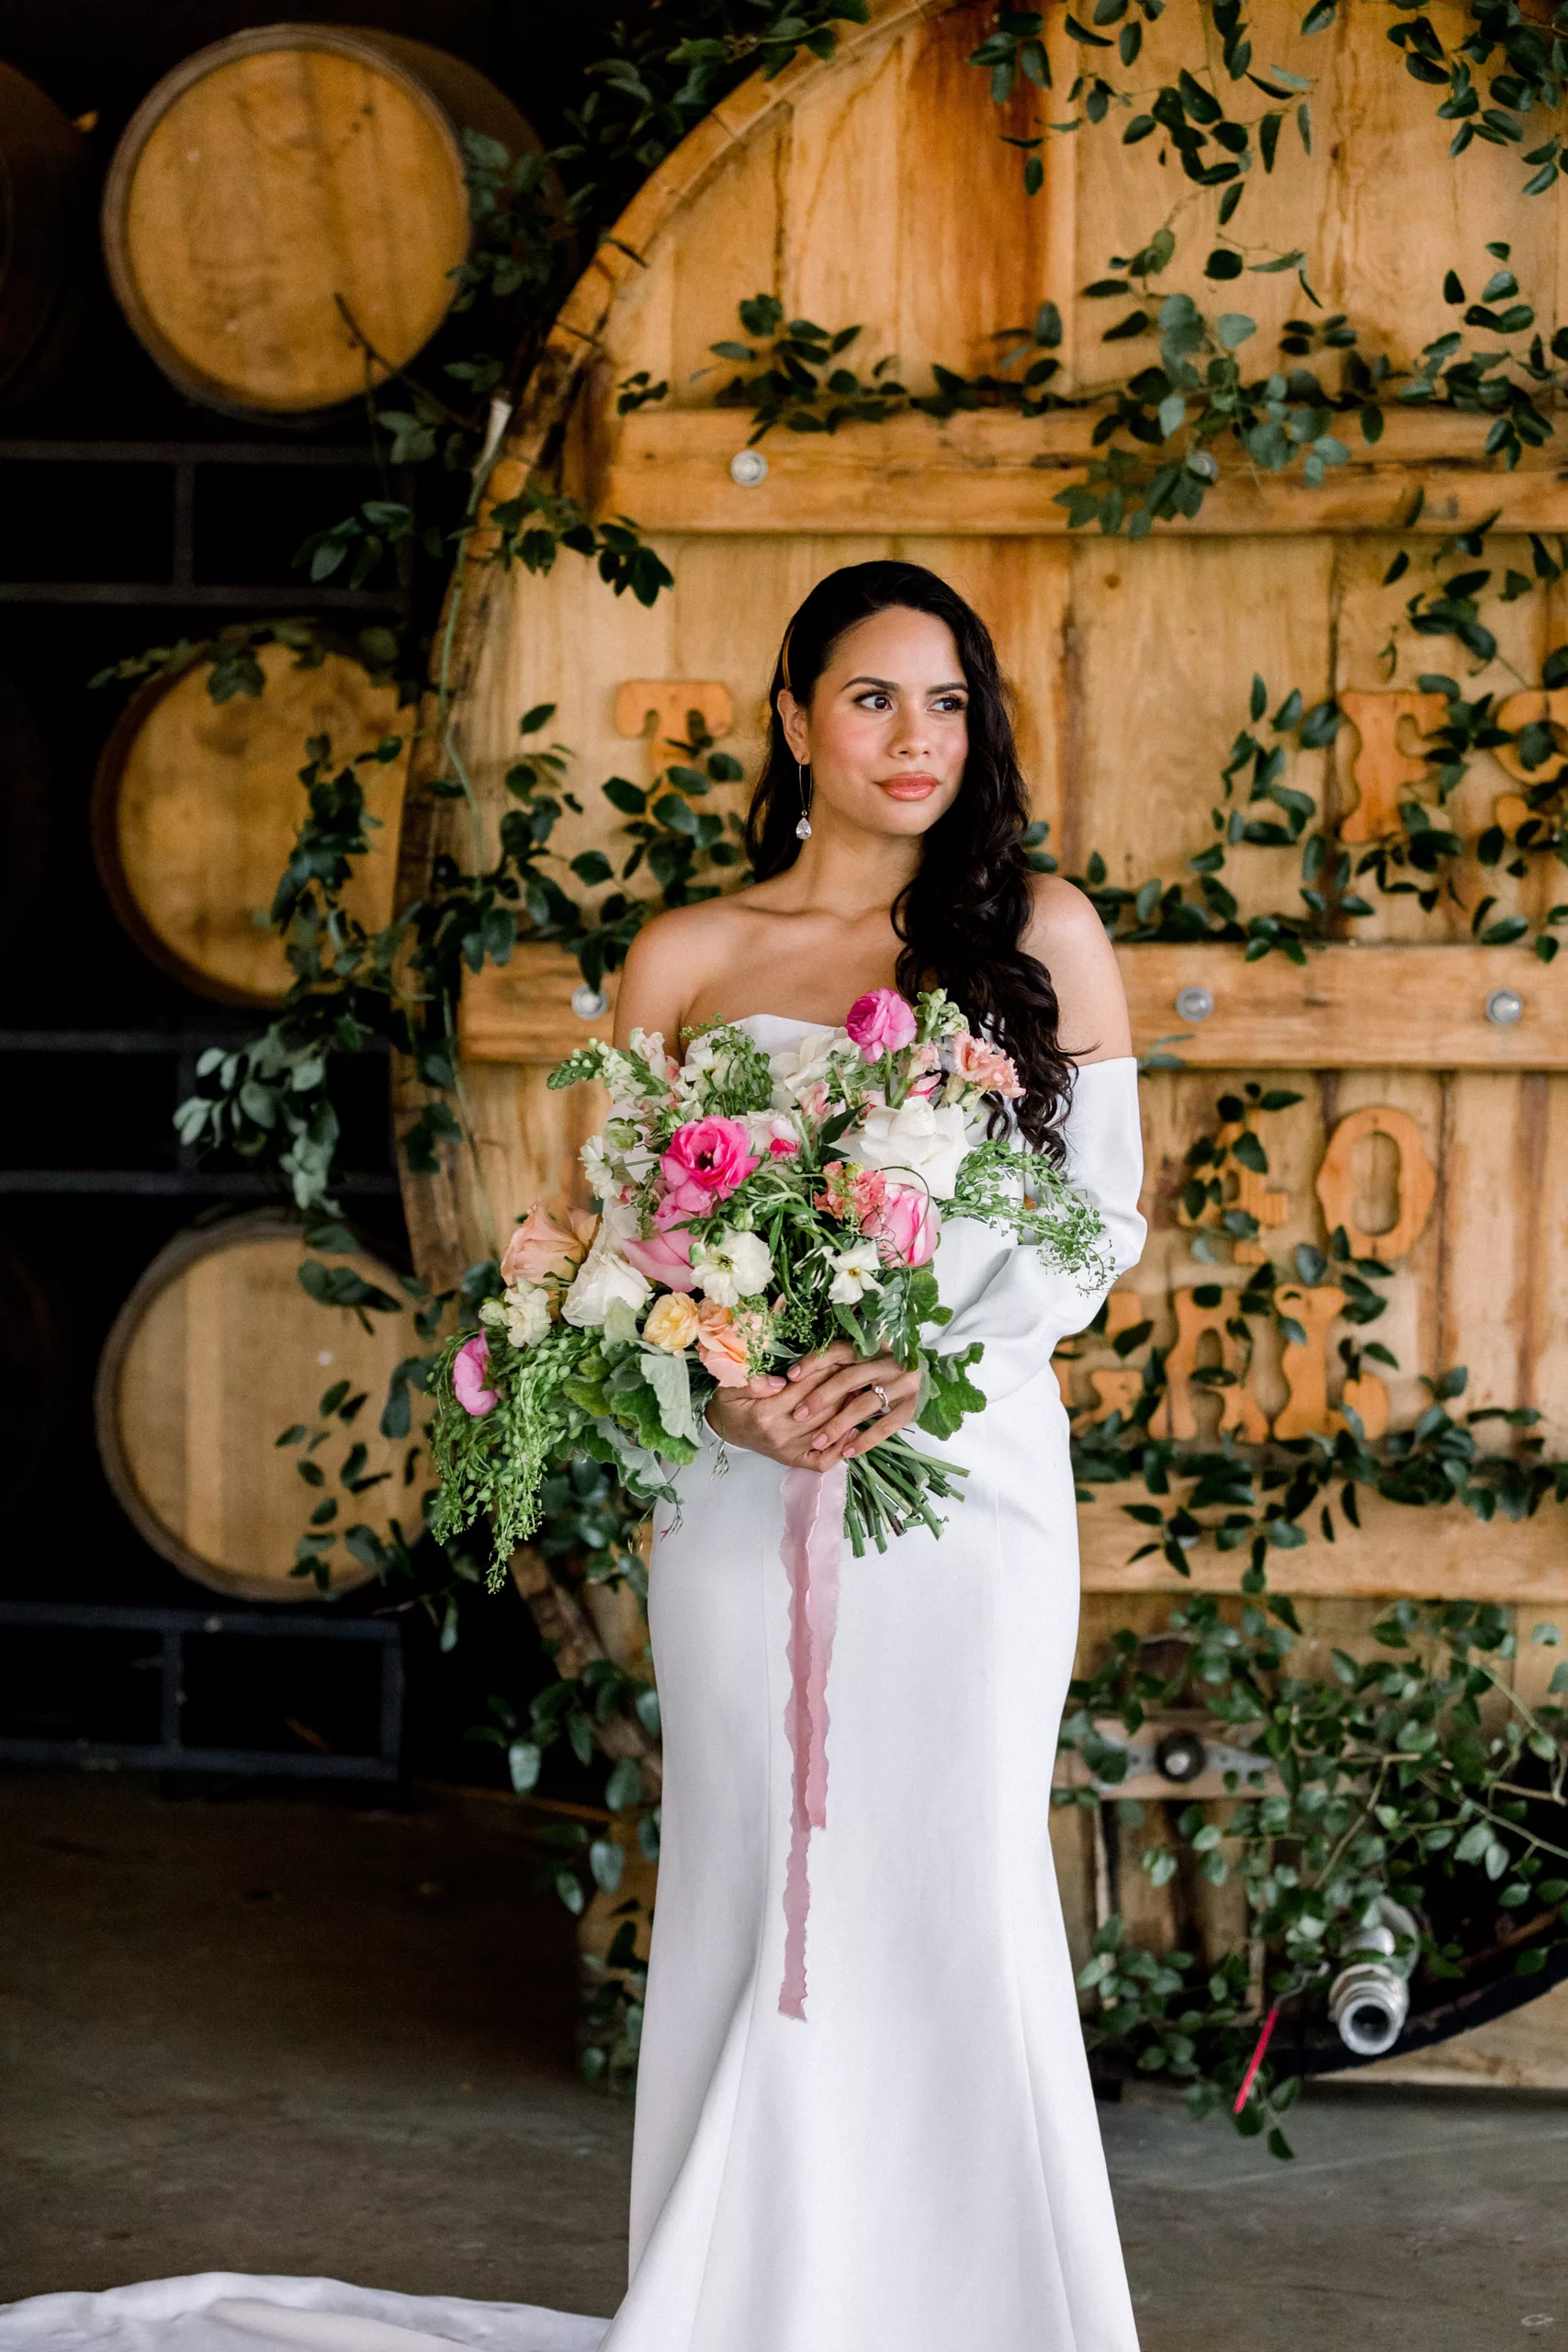 A bride in a silk dress stands in front of a large wine cask holding a large colorful bouquet at a Chateau Elan Wedding